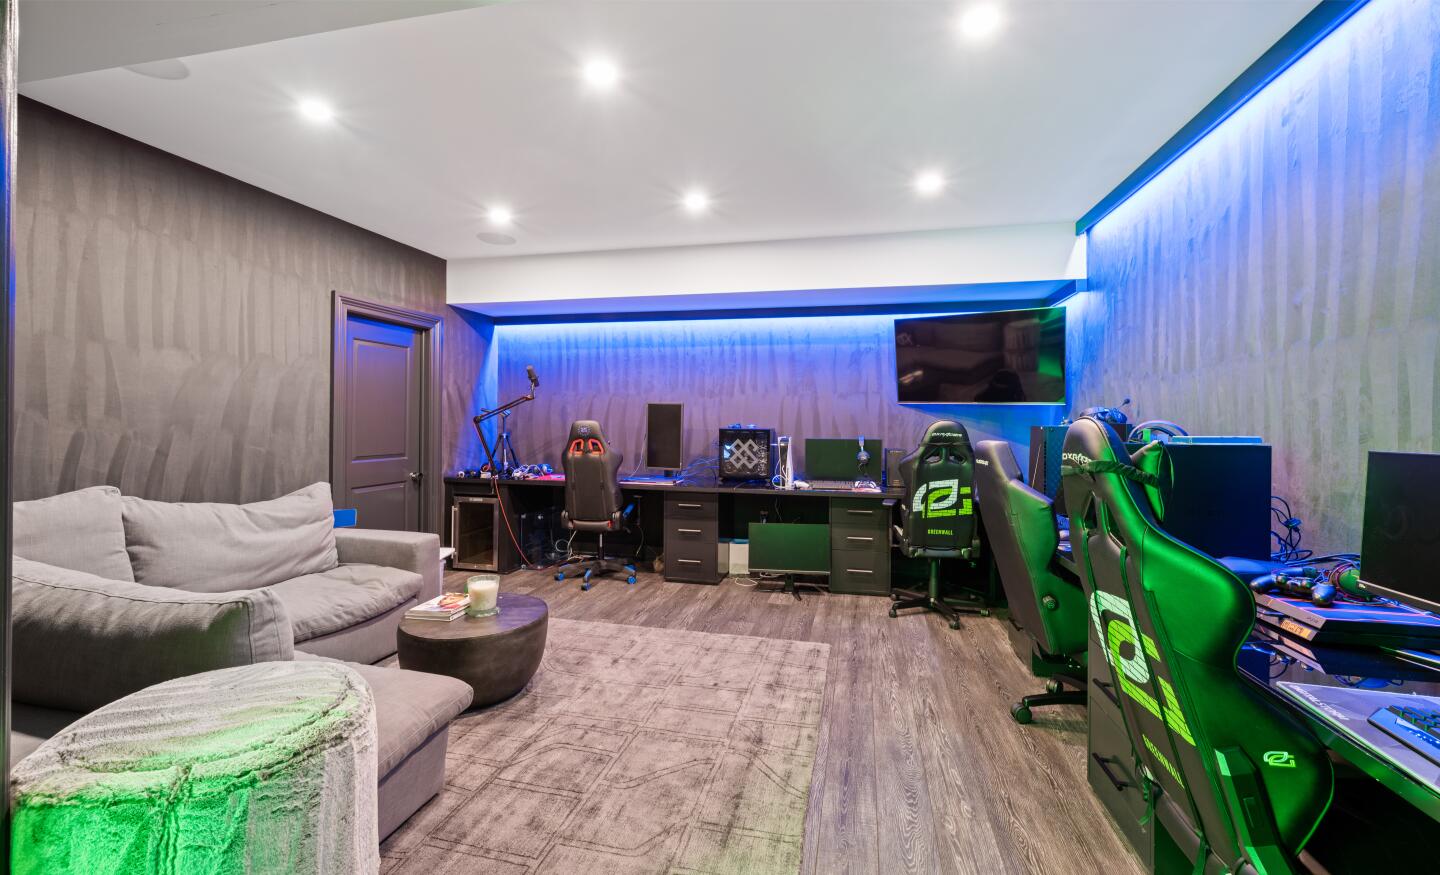 The gaming room.